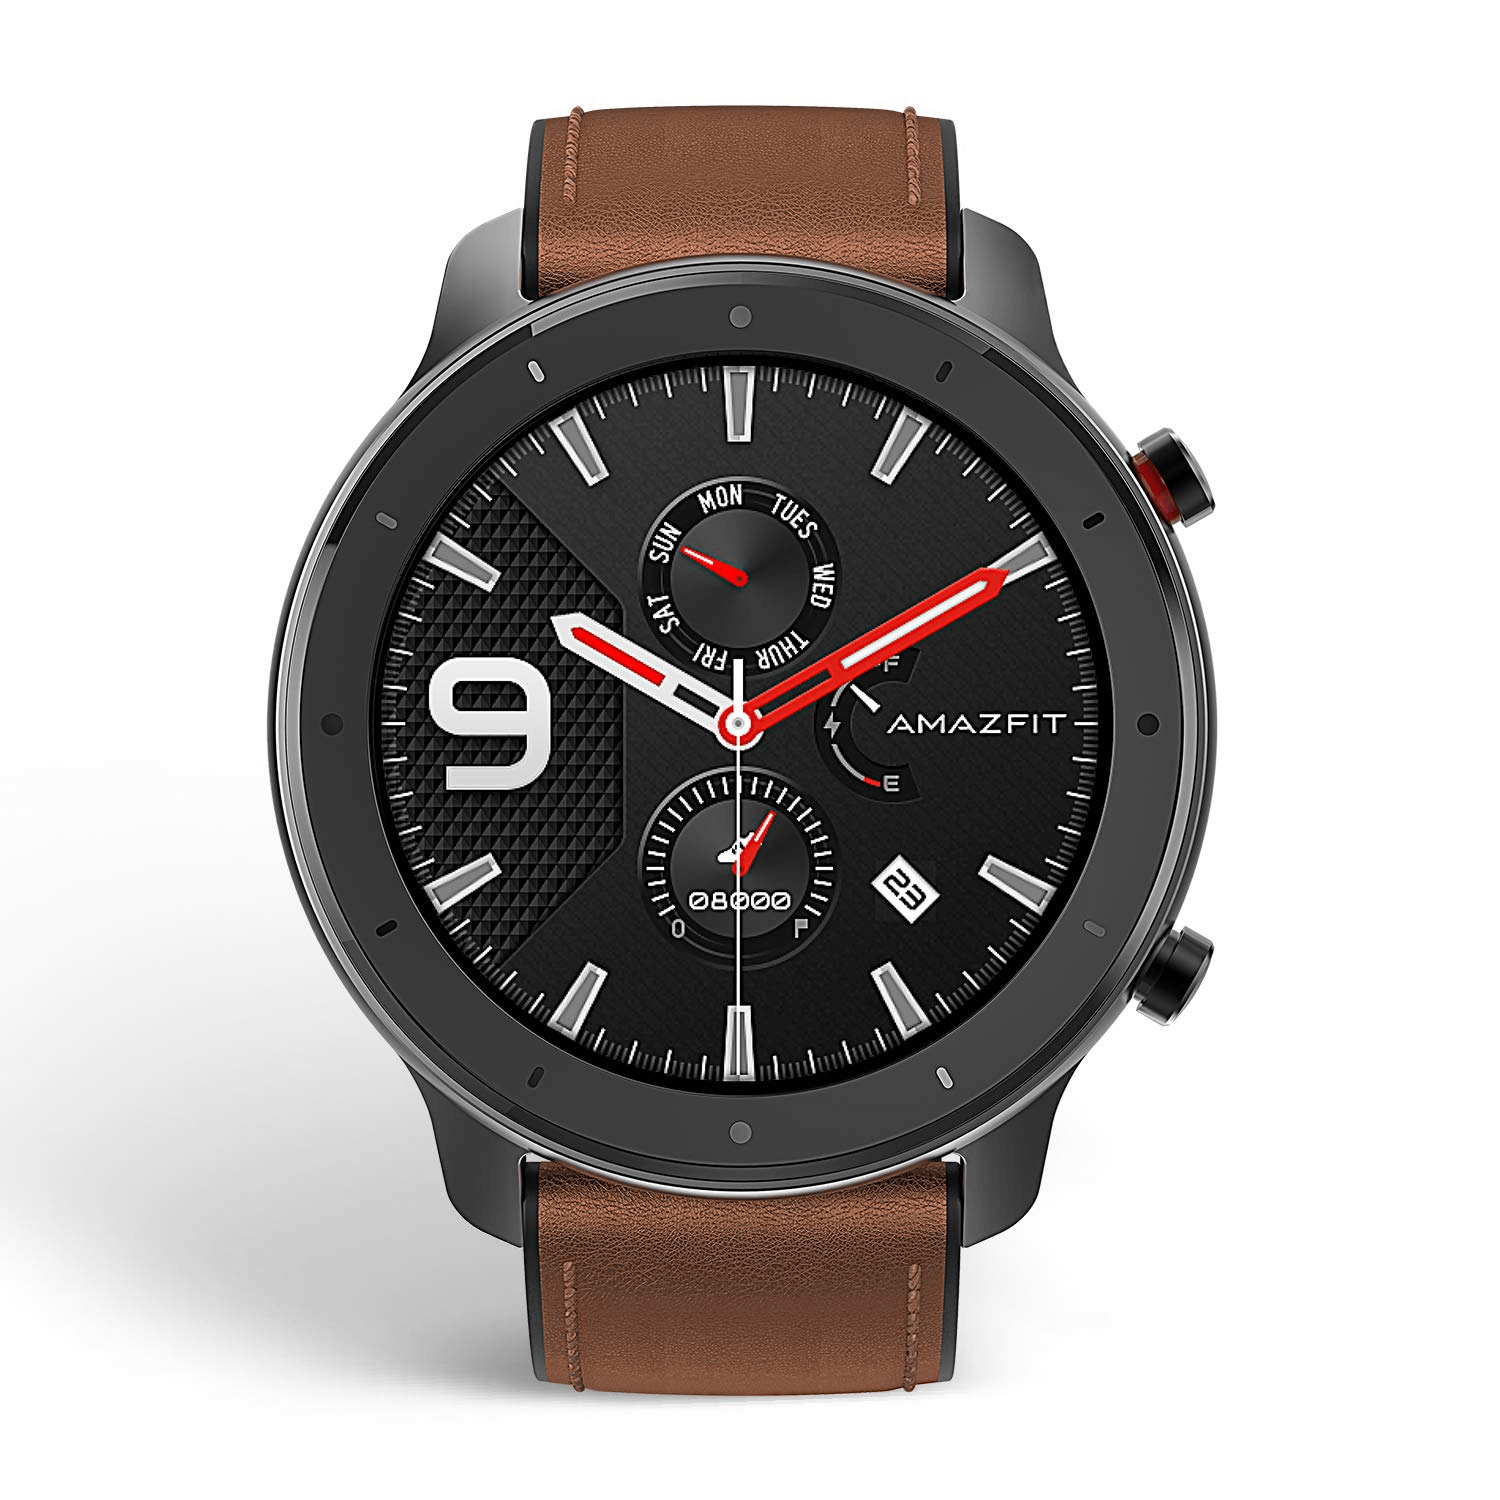 Amazfit GTR 47mm Smart watch Built in GPS  with 5.0 Bluetooth Connectivity - Aluminium Alloy